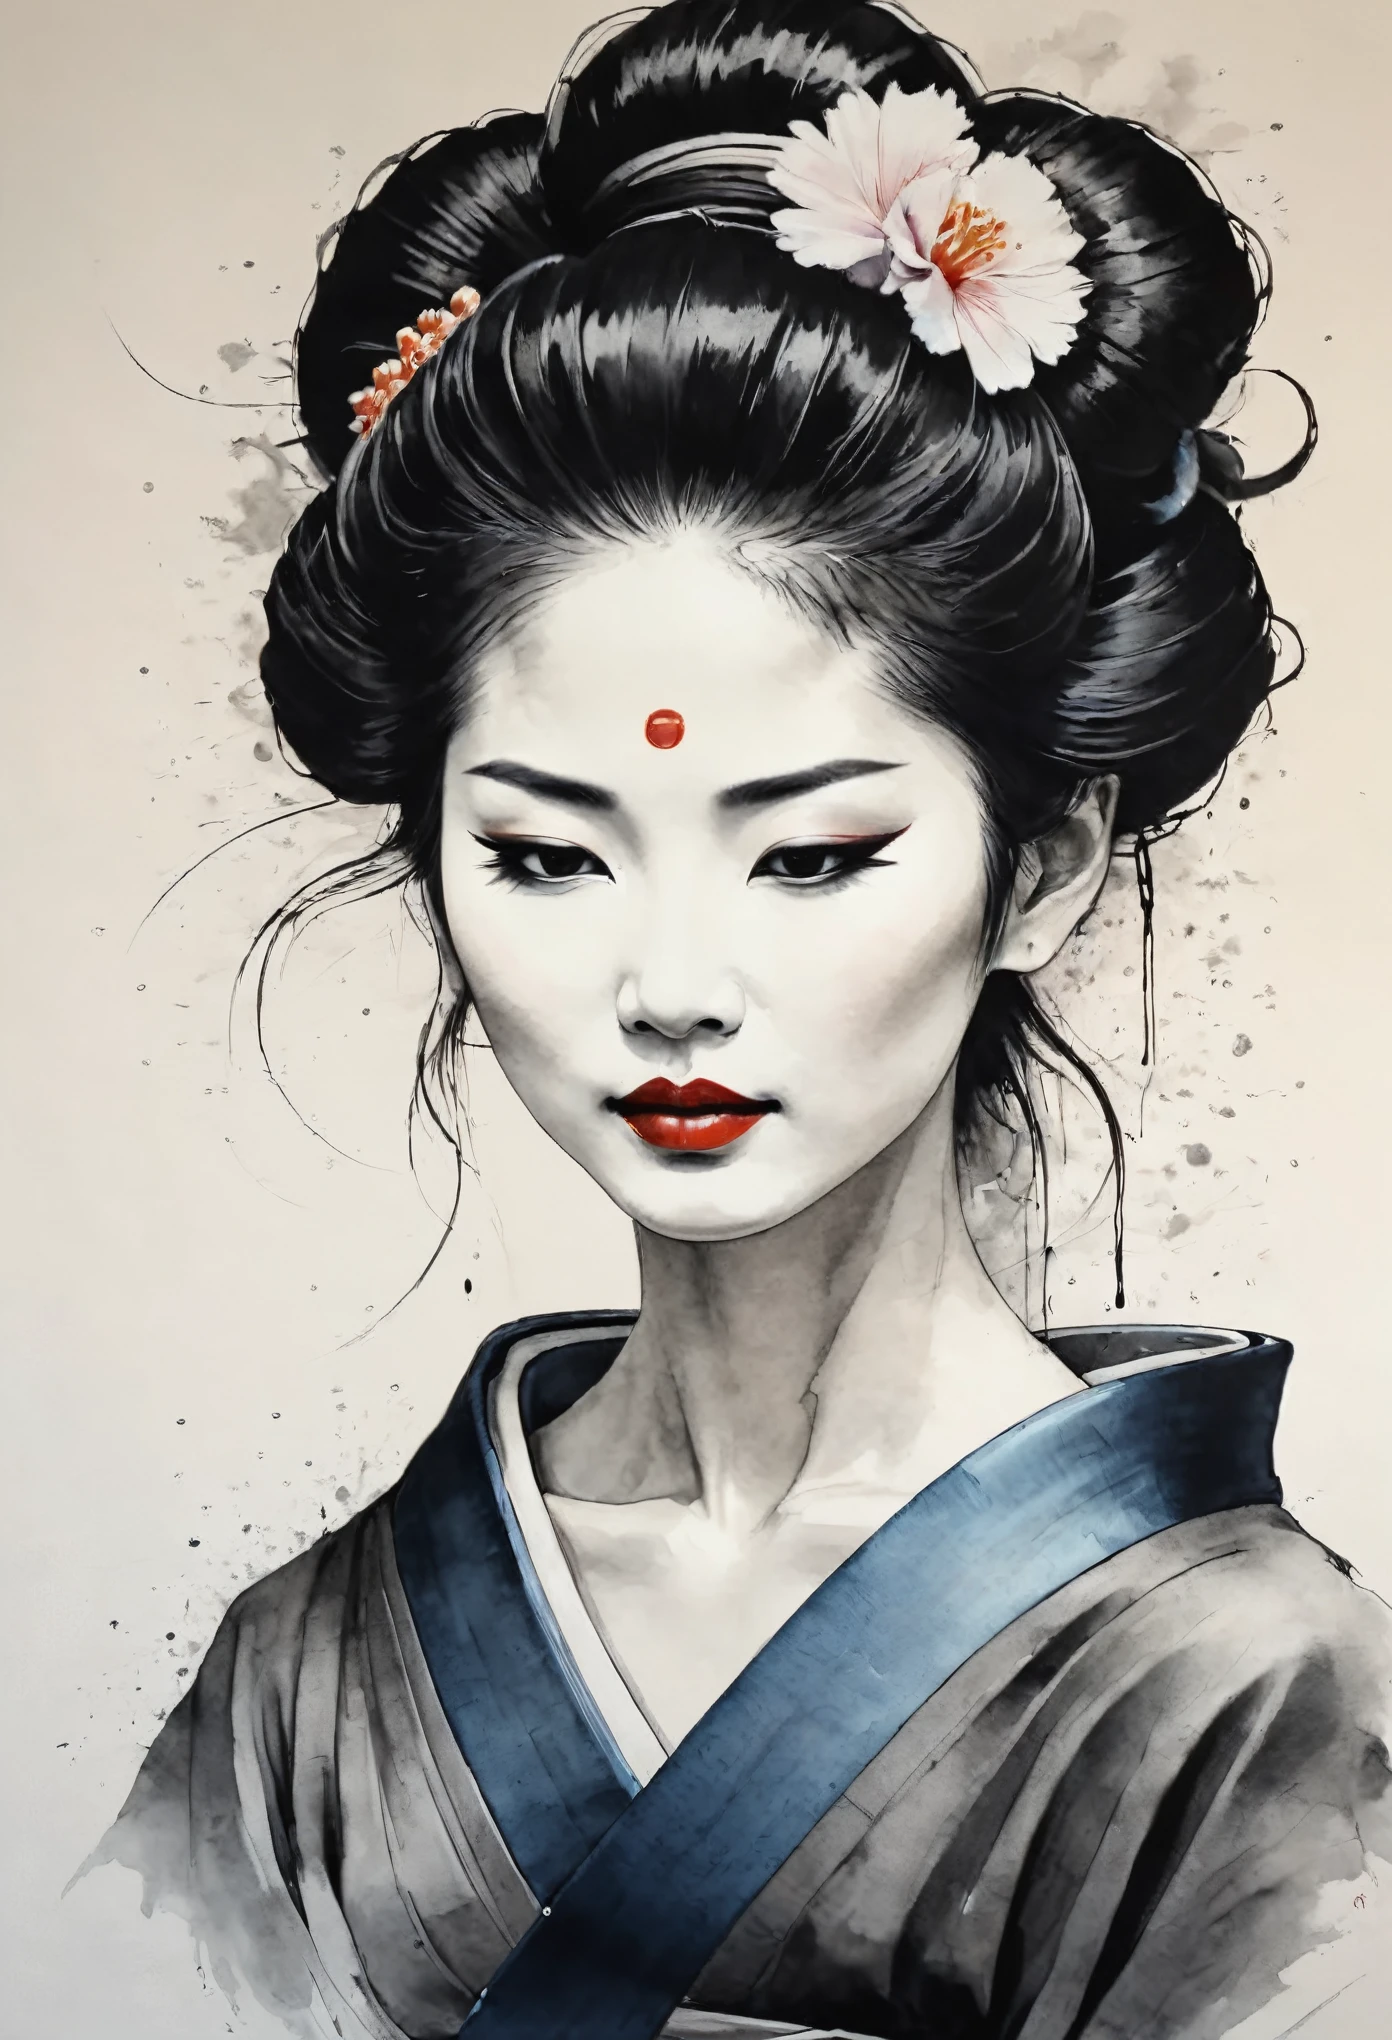 A minimalist ink draw painting, a close-up of a beautiful geisha emerges from the paper, defined by delicate, dripping lines of ink. Her serene yet fierce expression is captured with a few precise strokes, with the ink dripping gently to suggest depth and emotion.